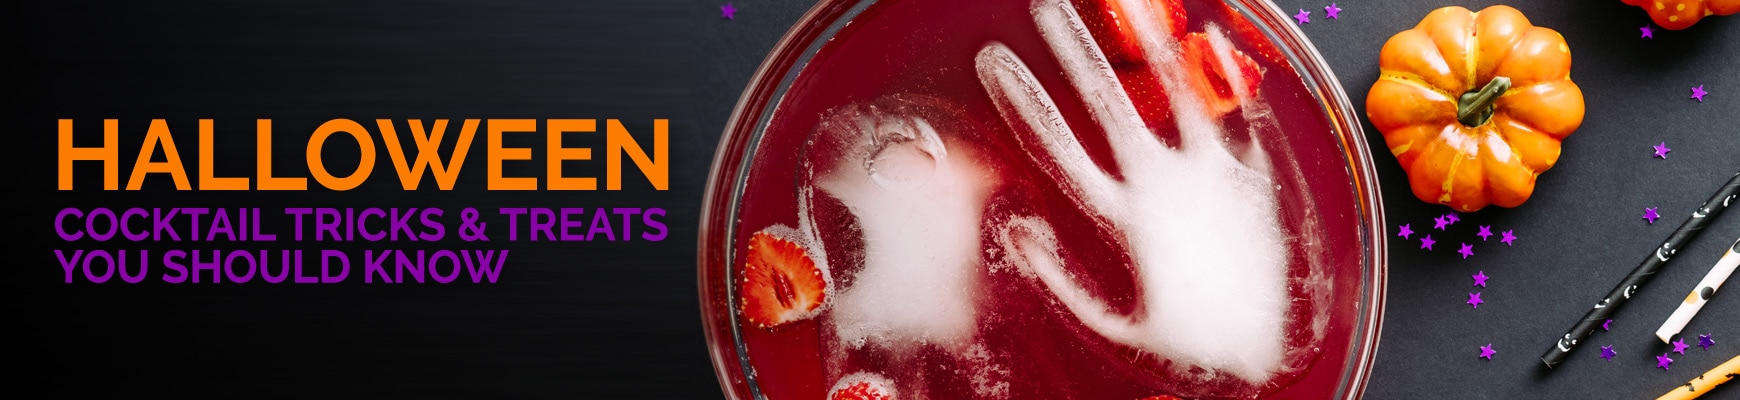 Halloween Cocktail Tricks & Treats You Should Know